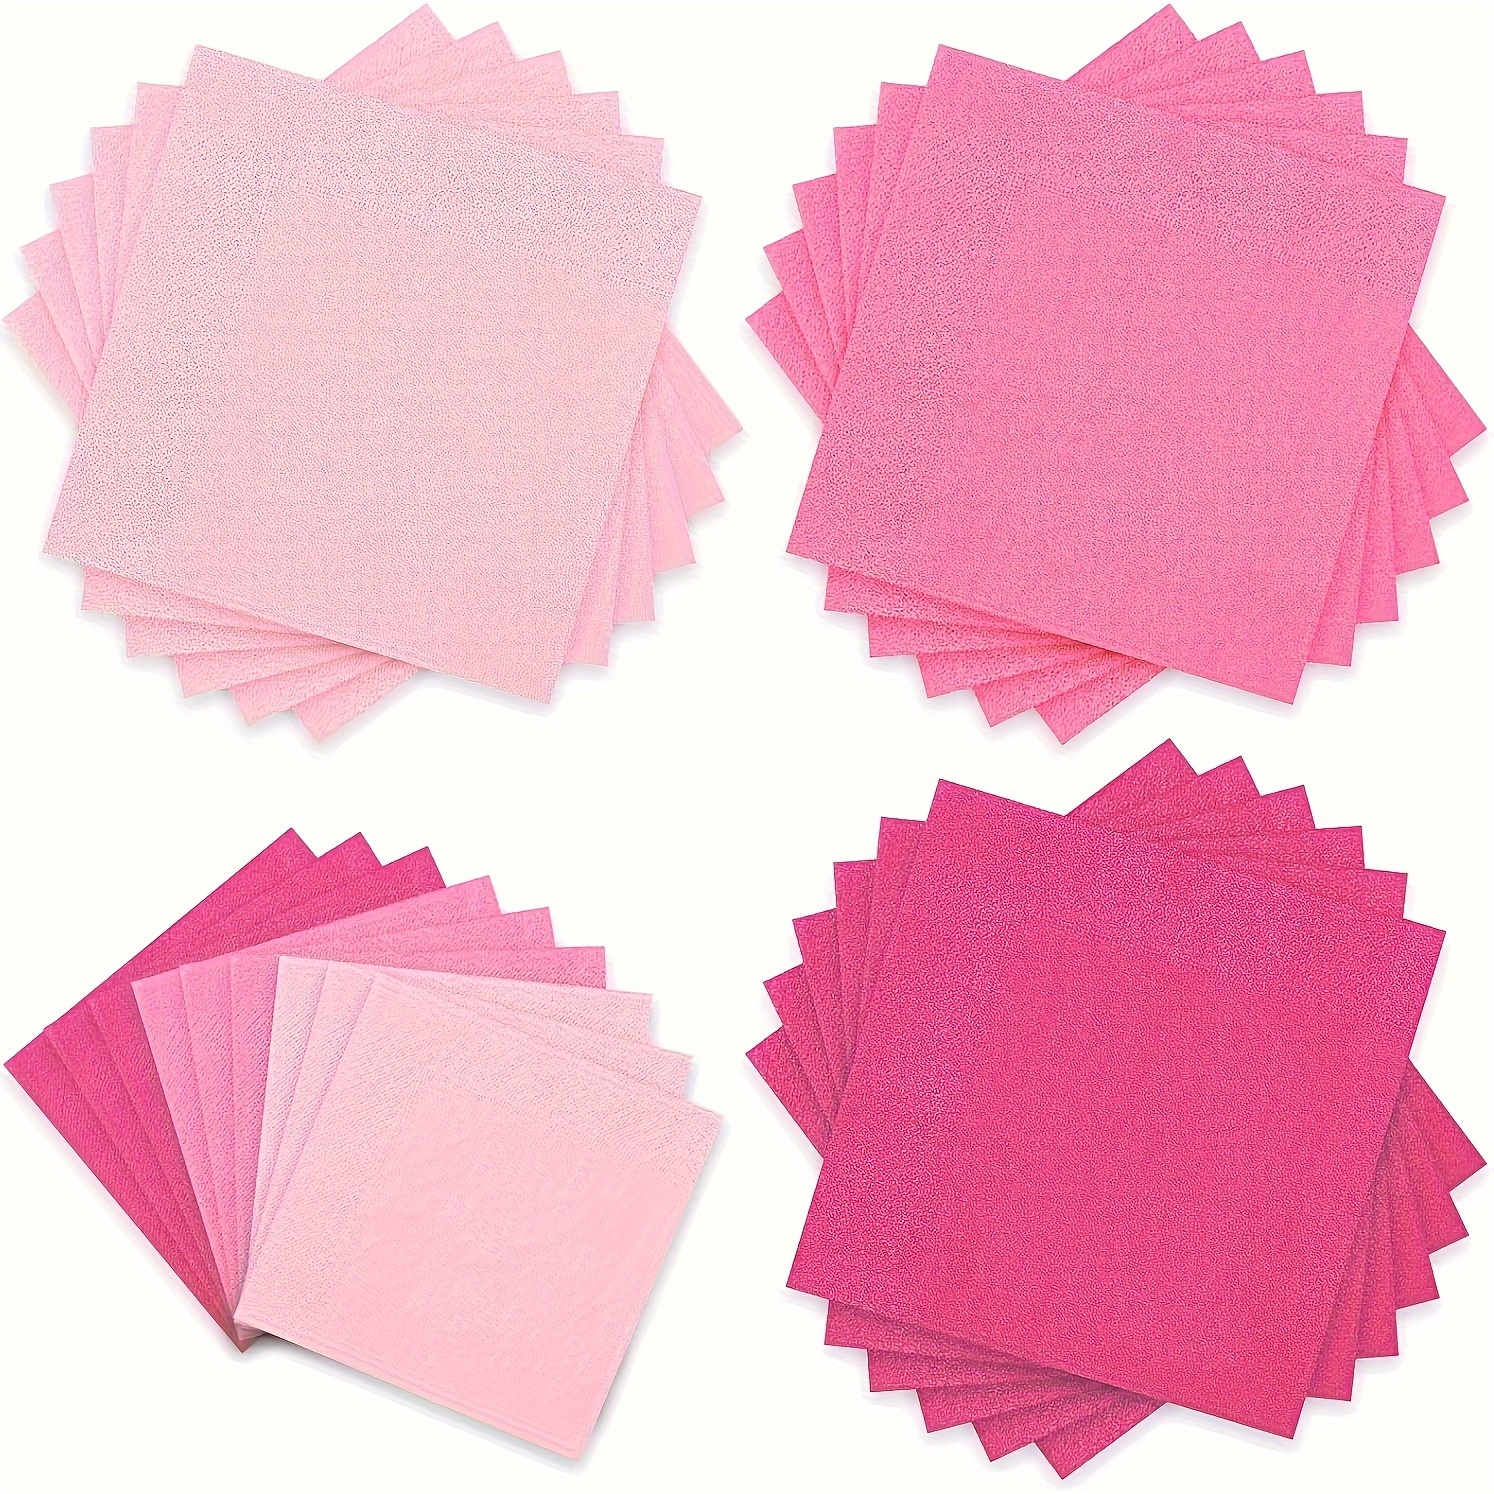 

60-pack Princess Themed Pink Paper Napkins, 2-ply Disposable Luncheon Napkins For Weddings, Bridal Showers, Birthdays, Valentine's Day Party Supplies & Table Decorations